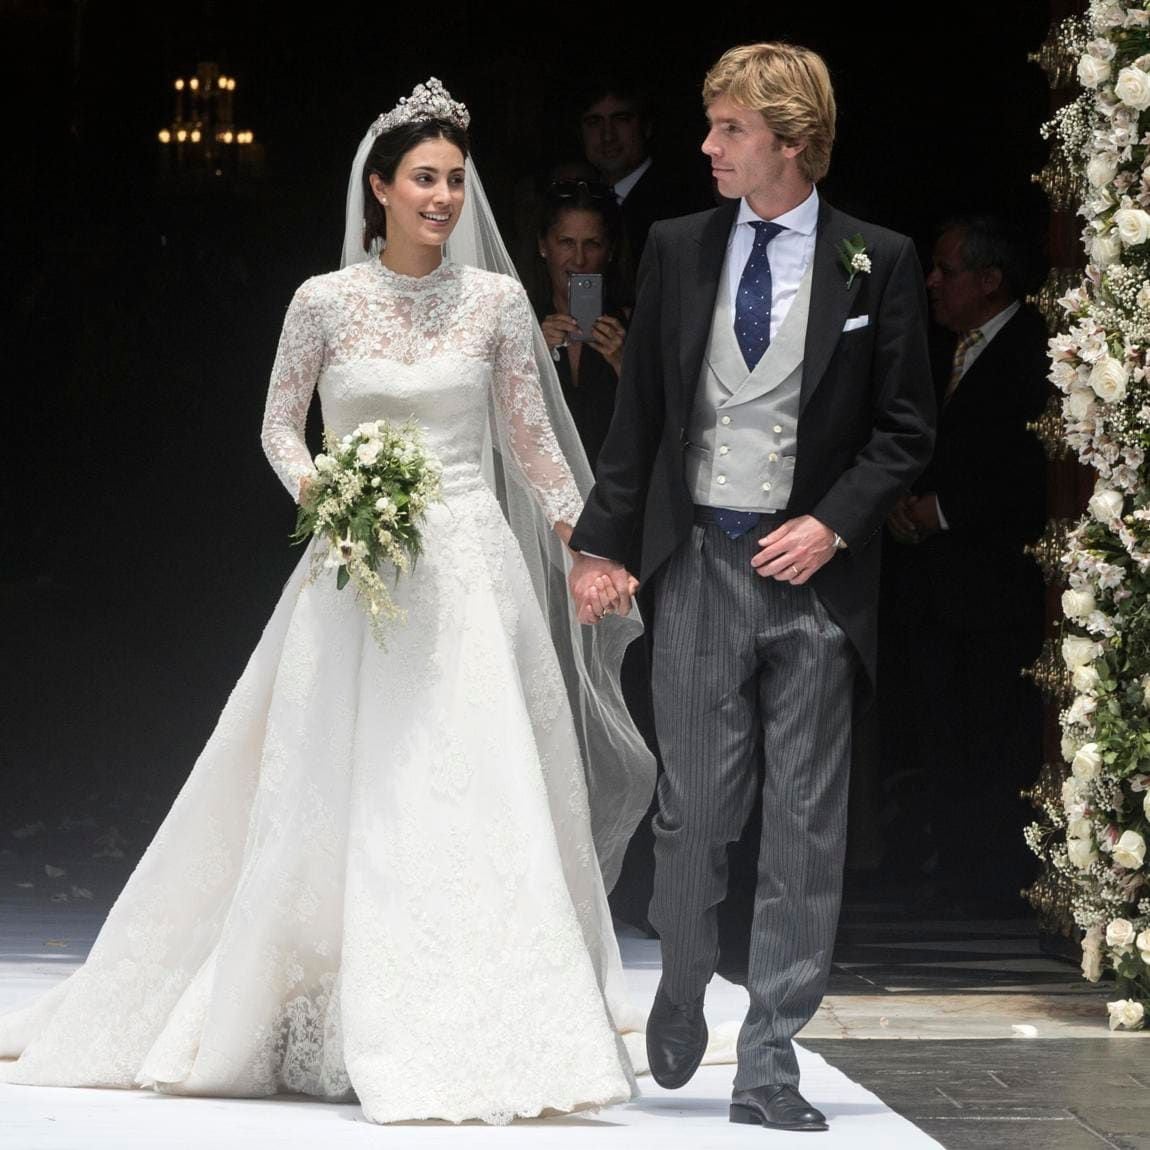 Prince Christian of Hanover marries in Peru